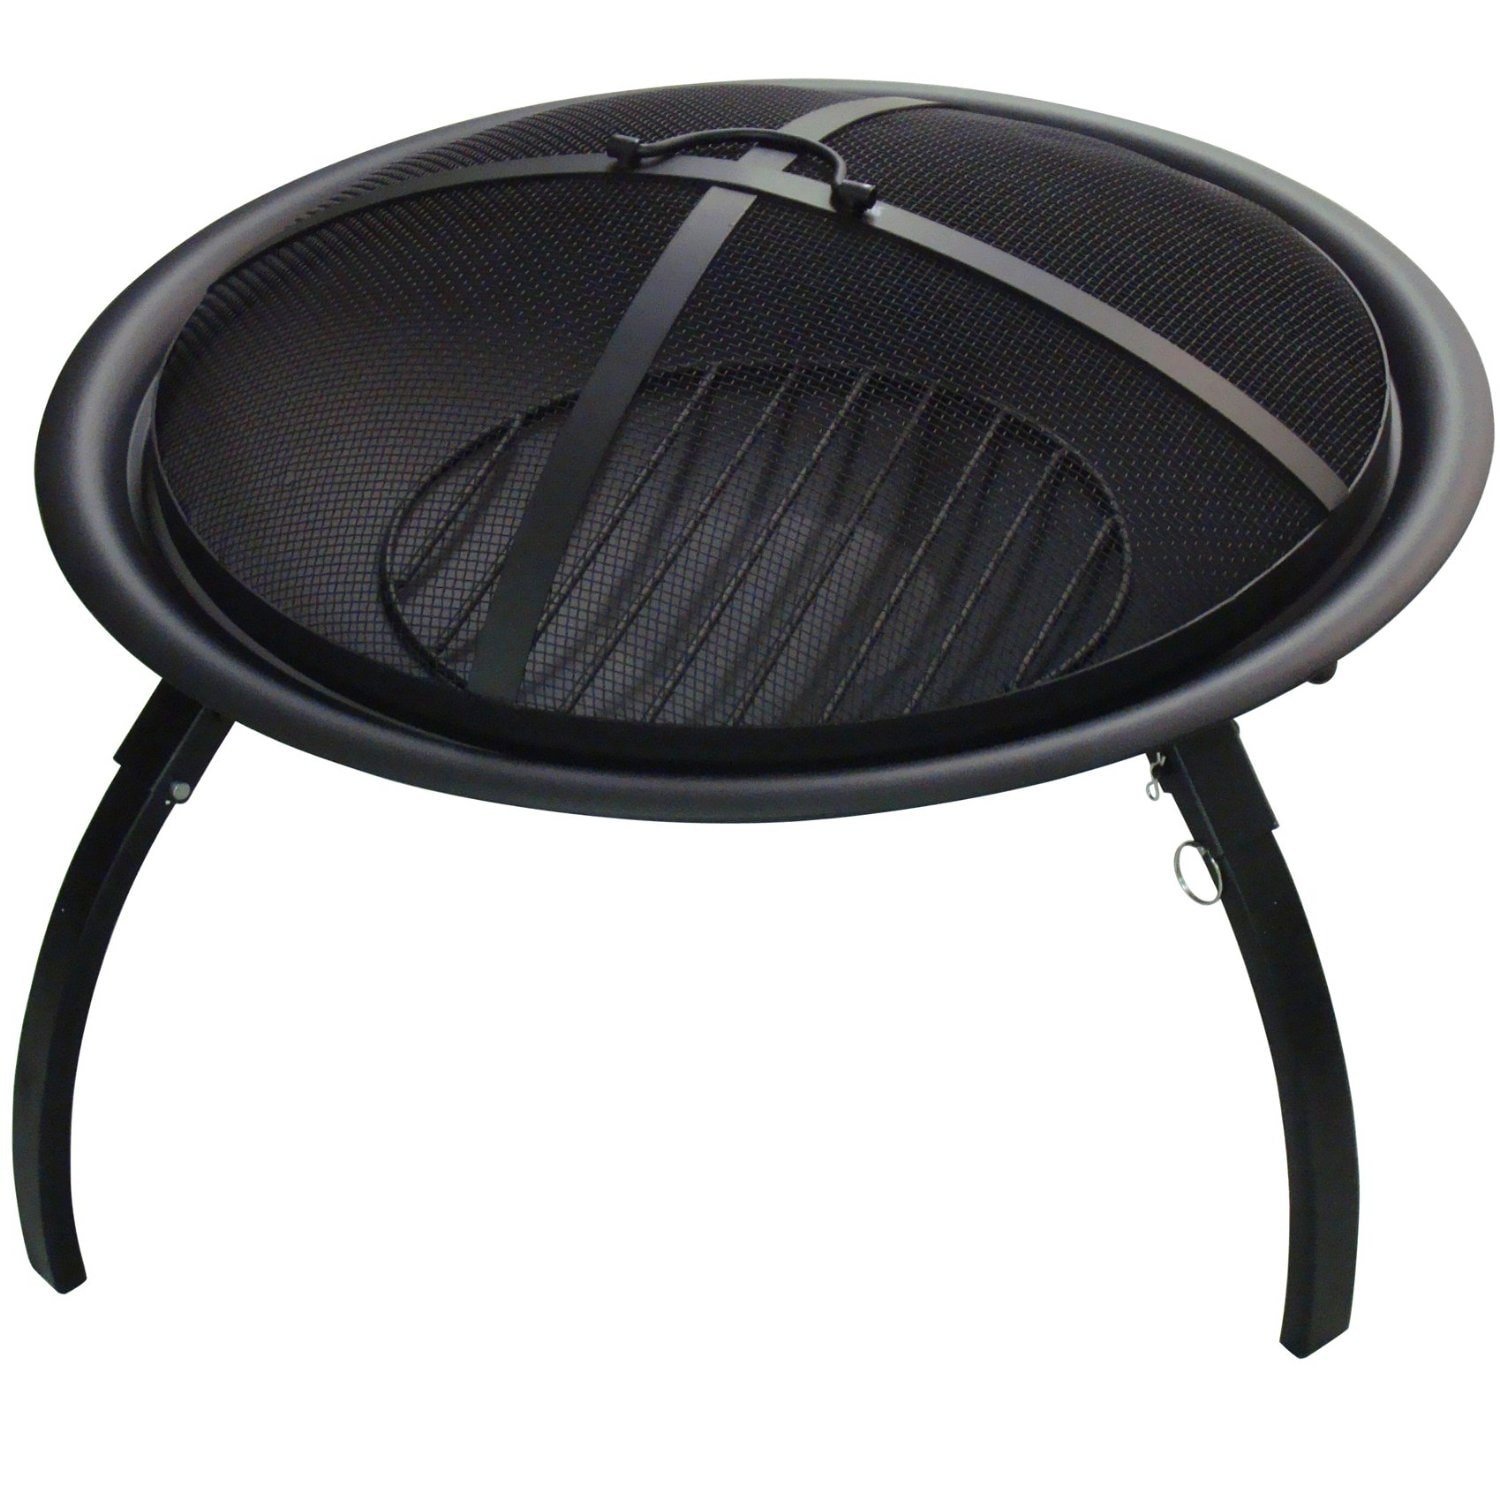 Char Broil Portable Firebowl (BlackDimensions 25.2 inches long x 25.2 inches wide x 6.5 inches high Weight 15.8 pounds )